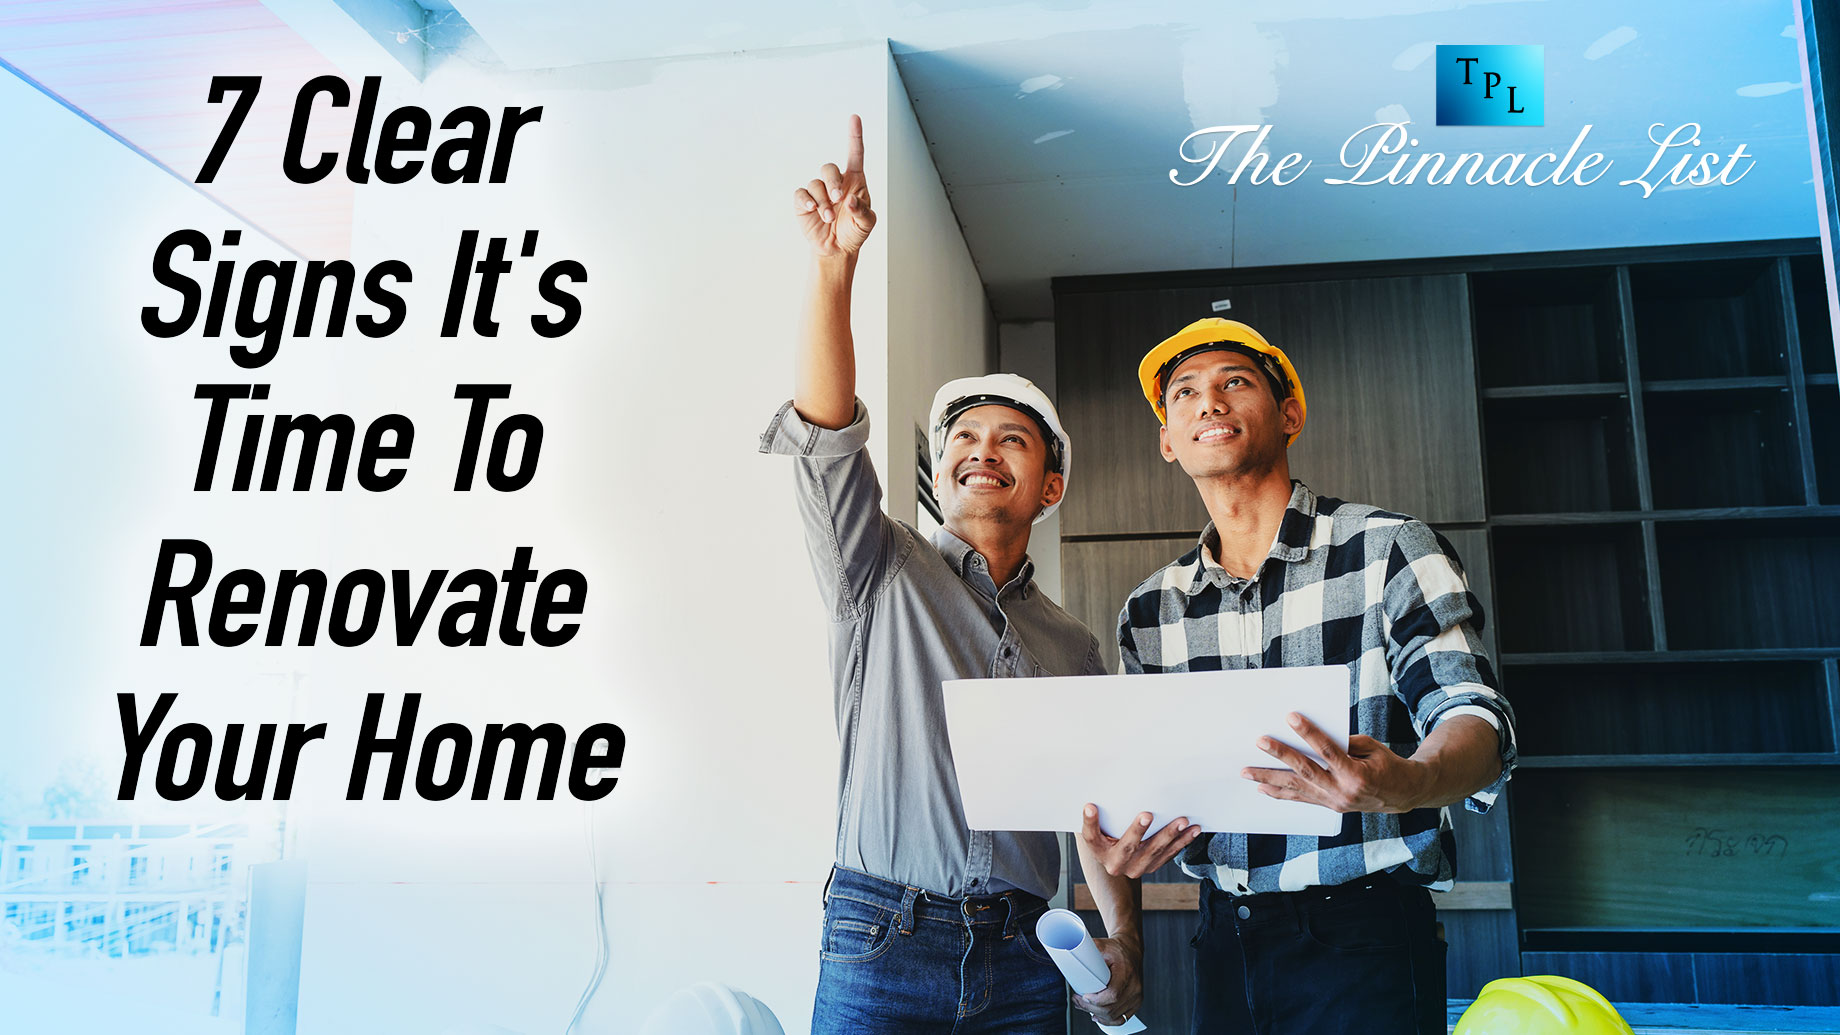 7 Clear Signs It's Time To Renovate Your Home